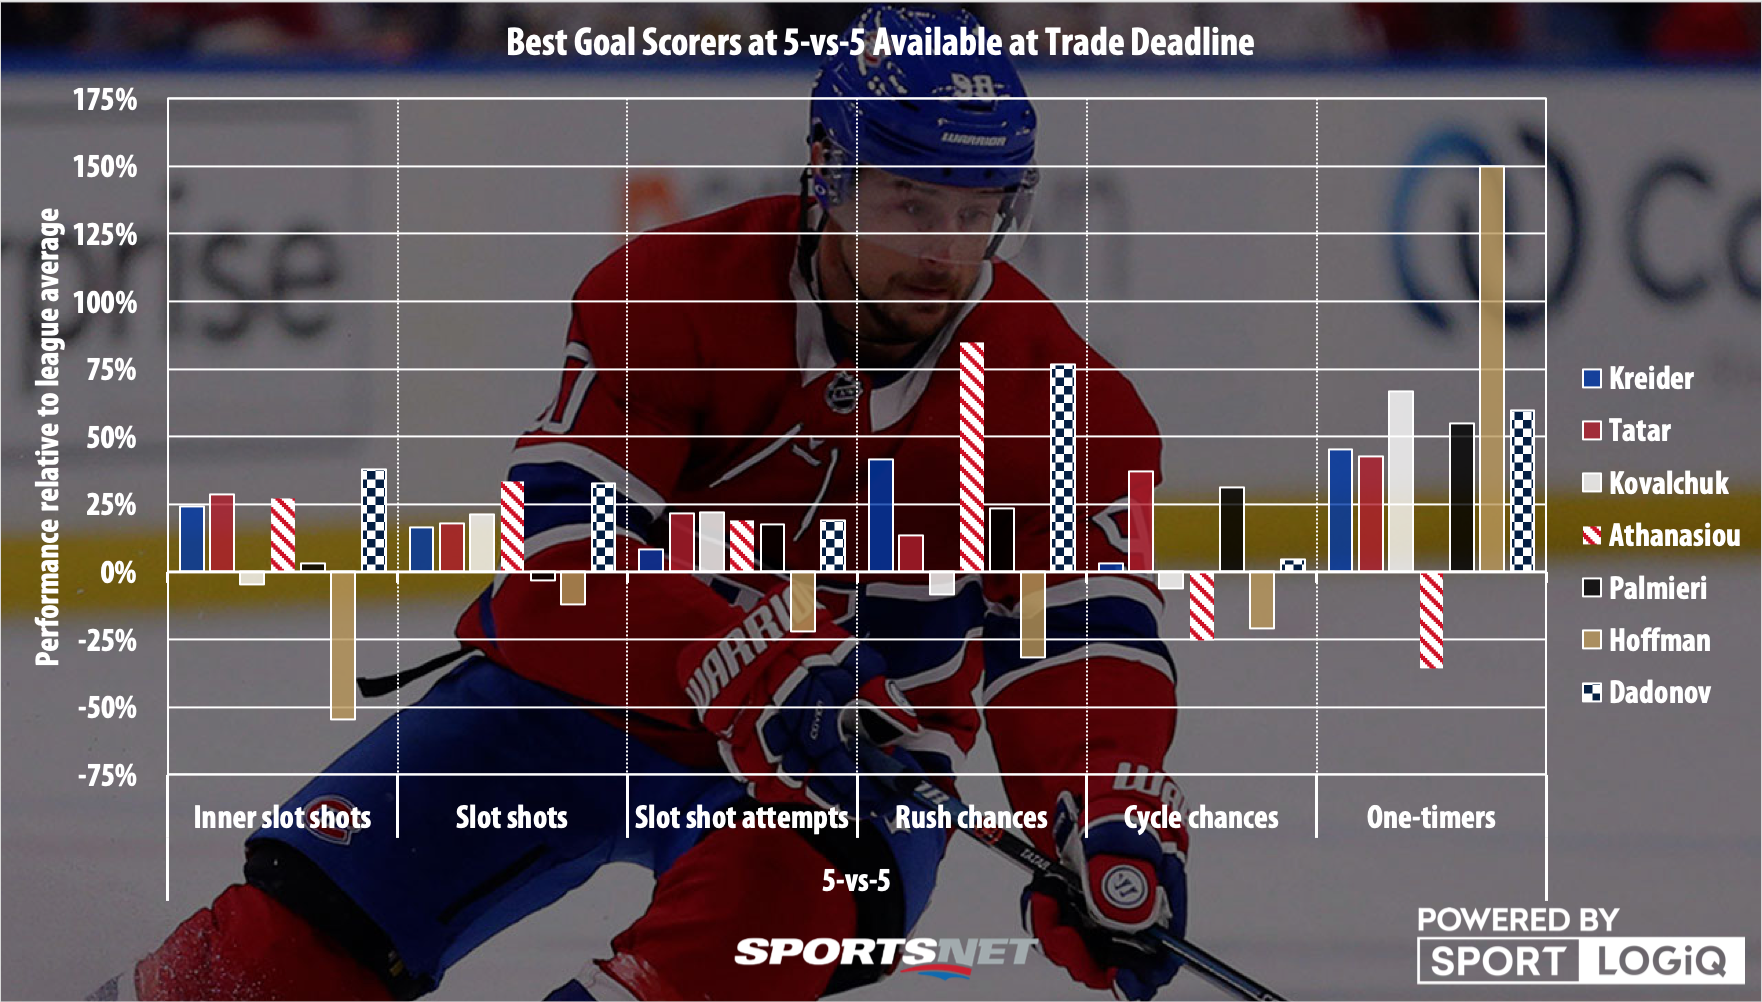 Analyzing the best goal scorers available at the 2020 NHL trade deadline